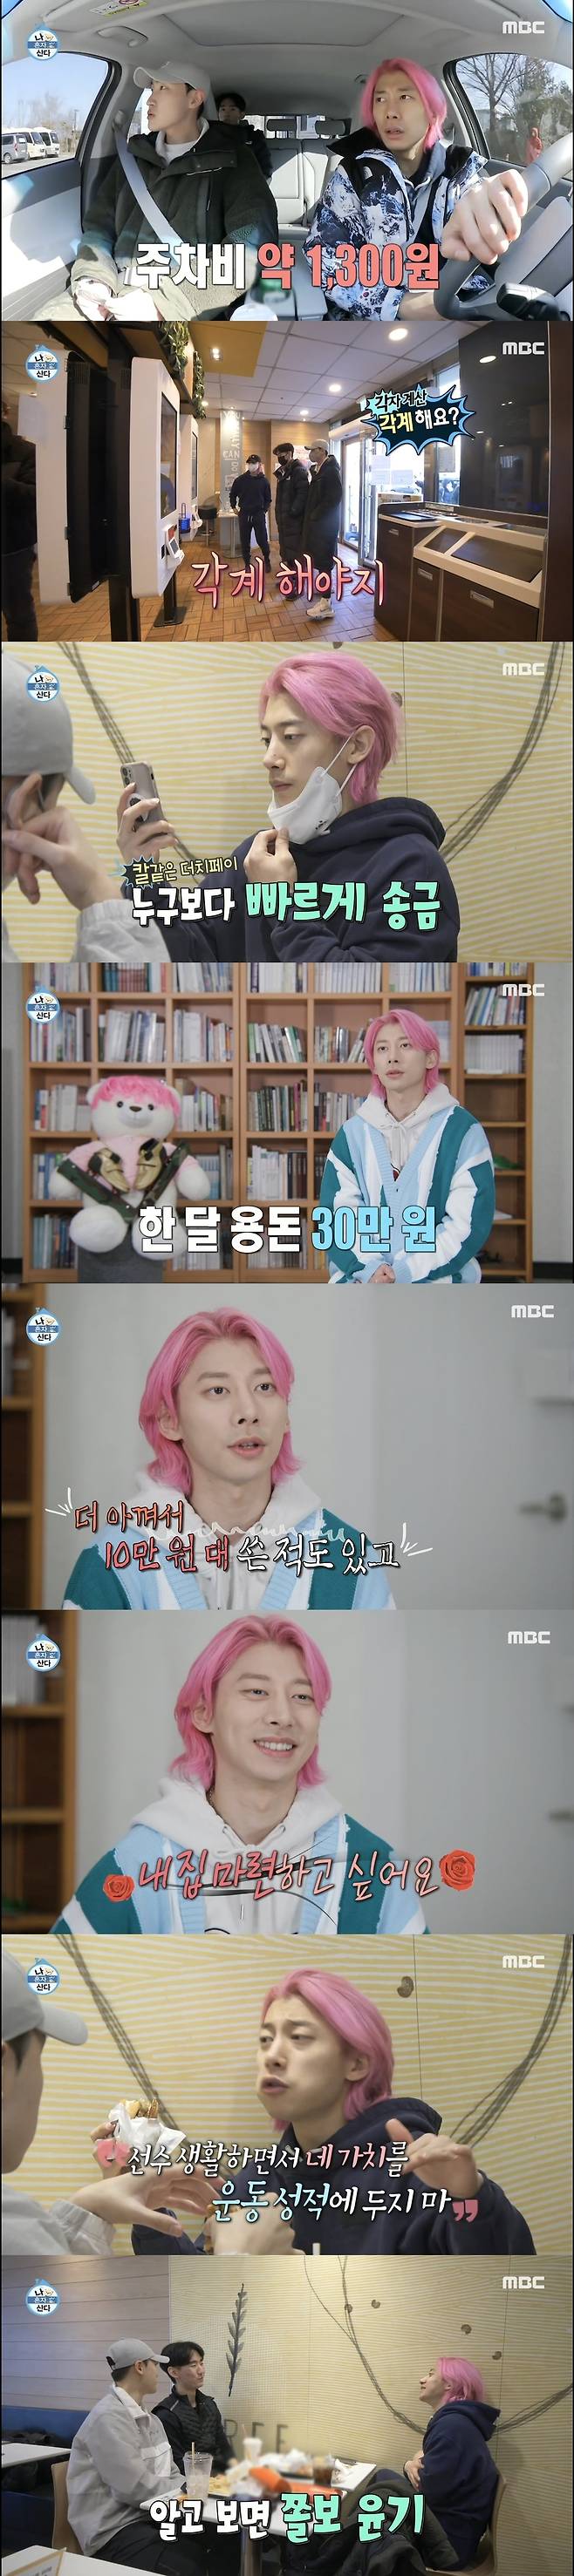 Short track national team Kwak Yoon-gy boasted an extraordinary saving spirit.In MBC entertainment program I Live Alone broadcasted on March 4, the daily life of short track players Kwak Yoon-gy and Kim A-lang was revealed.At the studio, Kian84 told Kwak Yoon-gy, Are you alone?Kwak Yoon-gy said, Arang did not get a positive Corona 19 test because he was not with him.I have been with Arang for a long time, so I will talk a lot about Arang. Jun Hyun-moo said, I mentioned I Live Alone in the interview at the Olympics. Kwak Yoon-gy said, It is a program that I wanted to come out too much since the PyeongChang Olympics.I thought I was not alone at the time. I have a living in my quarters. I do not know how lucky I am now. Kwak Yoon-gy said, I am going to go to I Live Alone, which motivates me to win a medal at the Olympics.I thought I Live Alone when I overtook the semi-finals, Jun Hyun-moo said, You dont have to do that, its okay, thank you for us.Park Na-rae asked, Is it popular among the players of the Arang members? and Kwak Yoon-gy said, It is popular.If you are in Jincheon athletic village, you will look at other players. Jun Hyun-moo said, Do you get a lot of dashes when you look at it?I dont know until there, but I think Im hiding it a little bit, Kwak Yoon-gy said.Then Kodkunst said, Do not you want to know?I didnt want to miss it, said Jun Hyun-moo, teasing such a Kwak Yoon-gy, saying he was a jealous.When Park Na-rae asked, Do you see a lot of other players when you pass the athletic village? Kwak Yoon-gy quipped, I look at you ignorantly.After training, Kwak Yoon-gy found Kim A-lang, and the junior player said, I do not want to eat with my brother.Kwak Yoon-gy, who goes to eat with his juniors, was greatly pleased to say that parking was free; where he arrived, pondering the spirit of saving, was a hamburger shop.Kwak Yoon-gy informed him that he was a various world (counting each), and his juniors expressed regret, saying, I earned a lot.Kwak Yoon-gy then said: I cant buy you these things, Ill buy you something more great later.Later, you picked it, he said, and sent it faster than anyone else, showing the appearance of a Dutch evangelist.Kwak Yoon-gy said: I admit it, Im a Dutchpay evangelist. I rarely spend money living in a athletes village.I spent 300,000 won a month when I wrote less, 100,000 won when I wrote more, and I think it is a reasonable consumption. I want to set up my house.I want to do it in my house, not I Live Alone at the hostel. The players were happy with the honey-like meal they ate after hard training, and the staff recognized and cheered them on, with Kwak Yoon-gy telling juniors: Is it a match two days later?I am good at the game, and the junior responded indifferently, What are you good at? Its fun.Kwak Yoon-gy said, Thats it, we have four years left in the Milan Olympics, and if you run too hard from now on, you end up getting tired of the fourth year.Once the skating sensation begins to collapse, it will not be caught from then on. Producer Kodkunst, who suffers from the pain of creation, also said, Even if you come out two or three songs a day, you will not come out for two or three weeks.Kwak Yoon-gy said, It is important for us to block the situation in the first place when we do that.I know you shouldnt do that, but dont put your value on your athletic performance in your career, and Im not going to finish as a worthy person after all.The athletes end up with unconditional performance, and even if they think about it, the exercise becomes easier and better. The player who is famous for being the most nervous on the short track floor.I am like a charismatic and position-keeping brother, but I am the most scared when I know it. Kwak Yoon-gy responded wittyly, I want to get rid of the real national team selection. I feel like Im going to have five years less, the junior said fiercely.